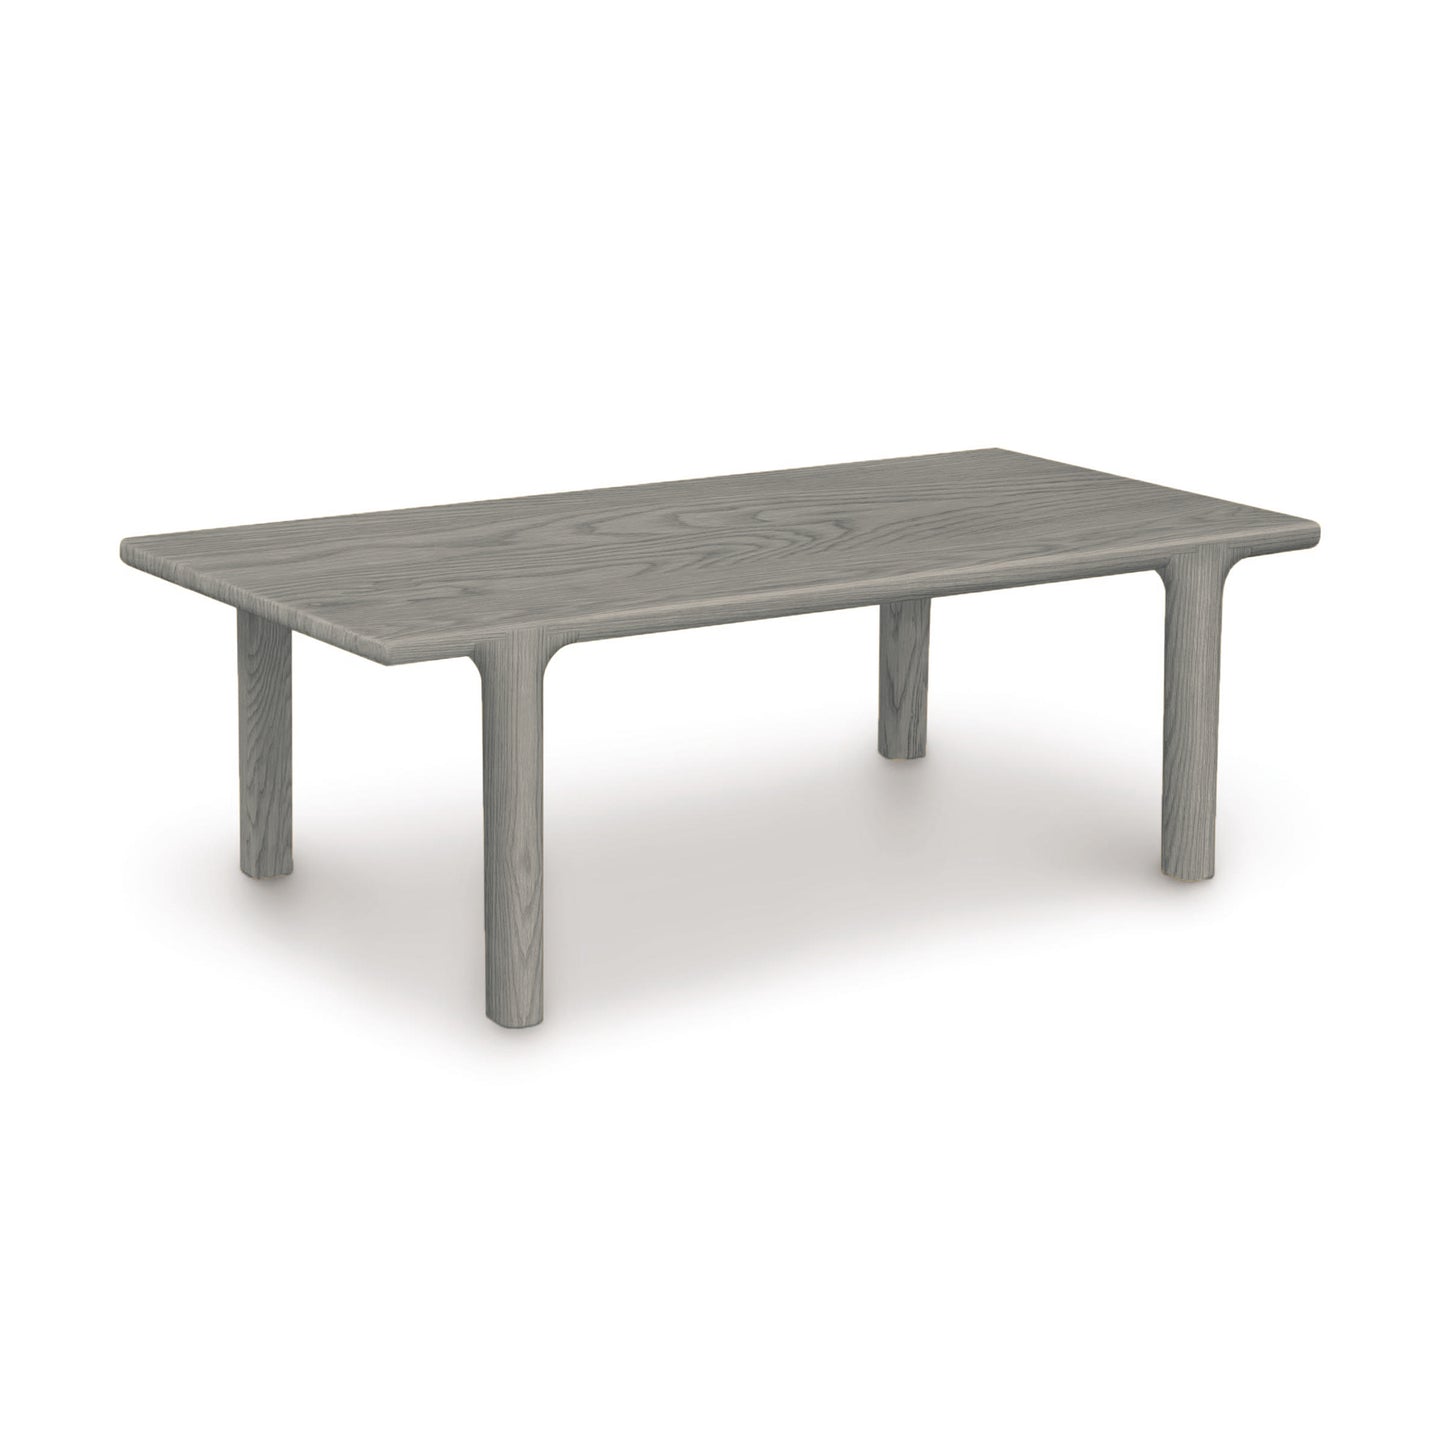 A simple Copeland Furniture Sierra Rectangular Coffee Table made of North American hardwood, with a rectangular top and four legs, depicted on a white background.